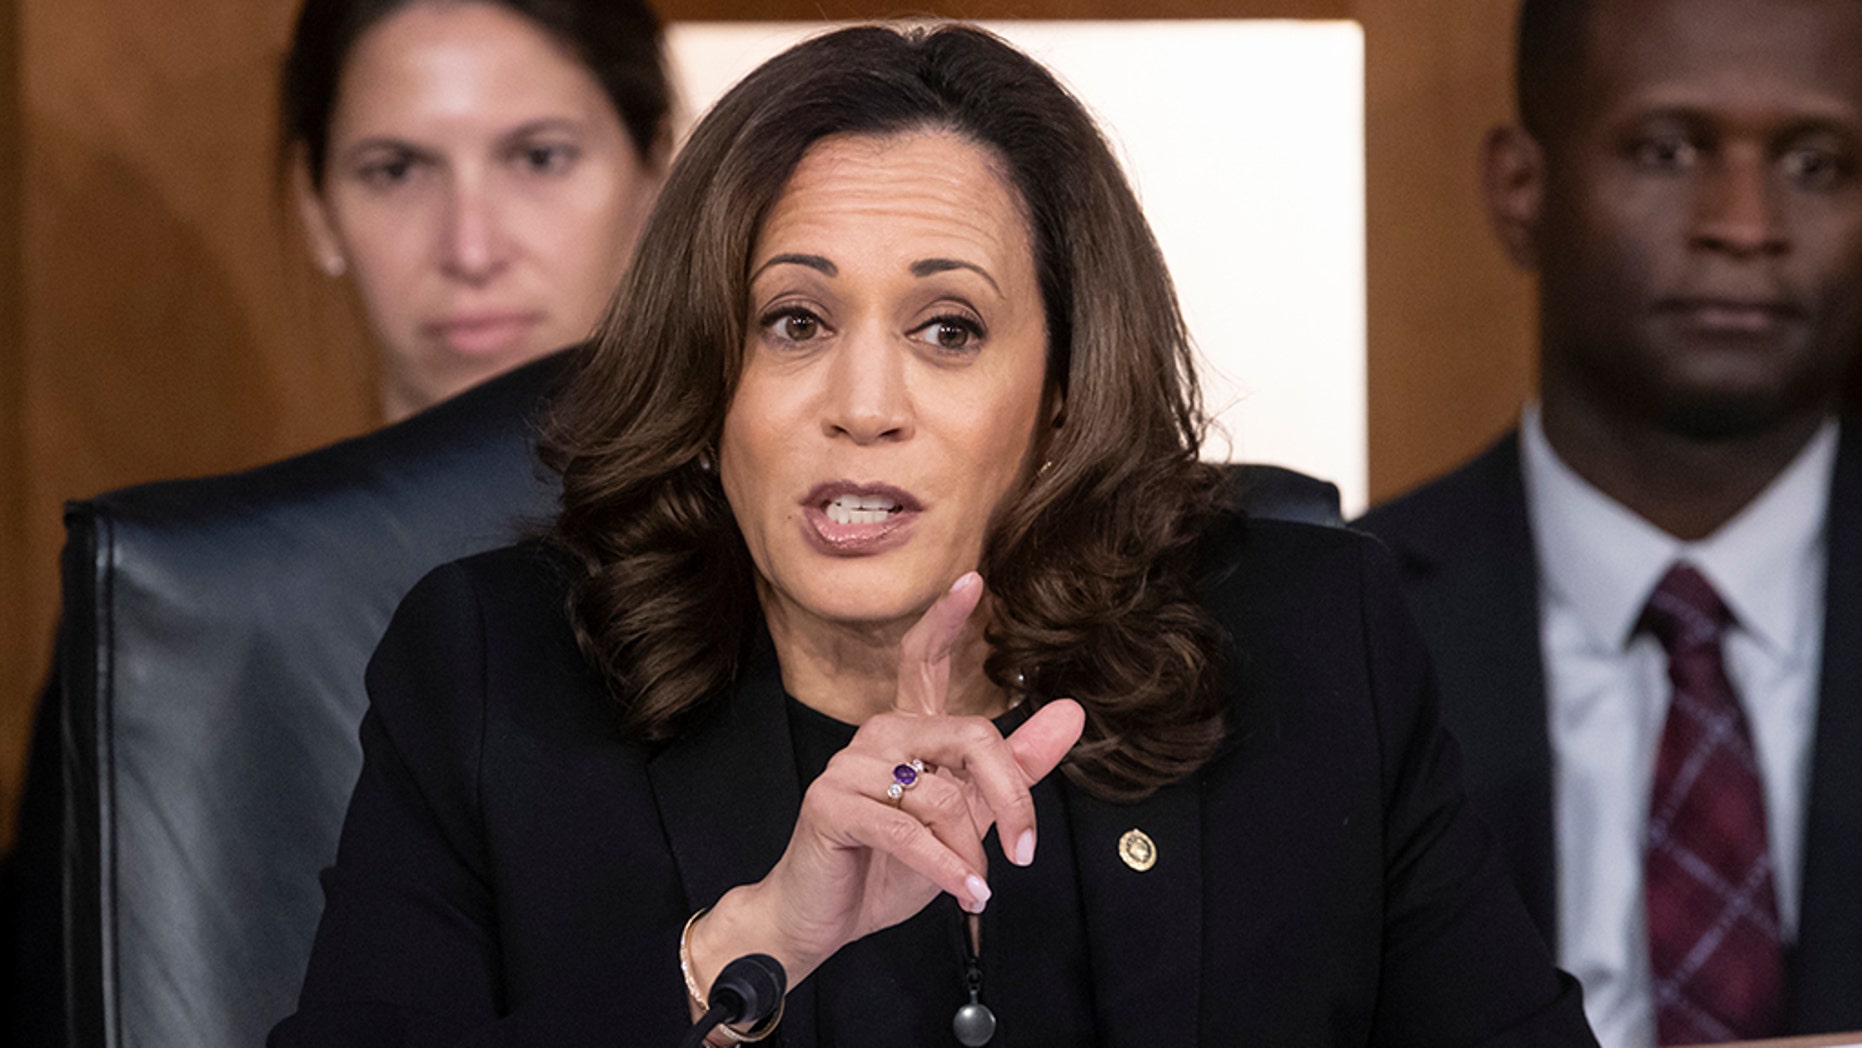 Senator Kamala Harris, D-Calif., Perceived as a potential presidential candidate of 2020, caught the eye during the initial confirmation hearing of Brett Kavanaugh with his intense interrogation. (Associated Press)